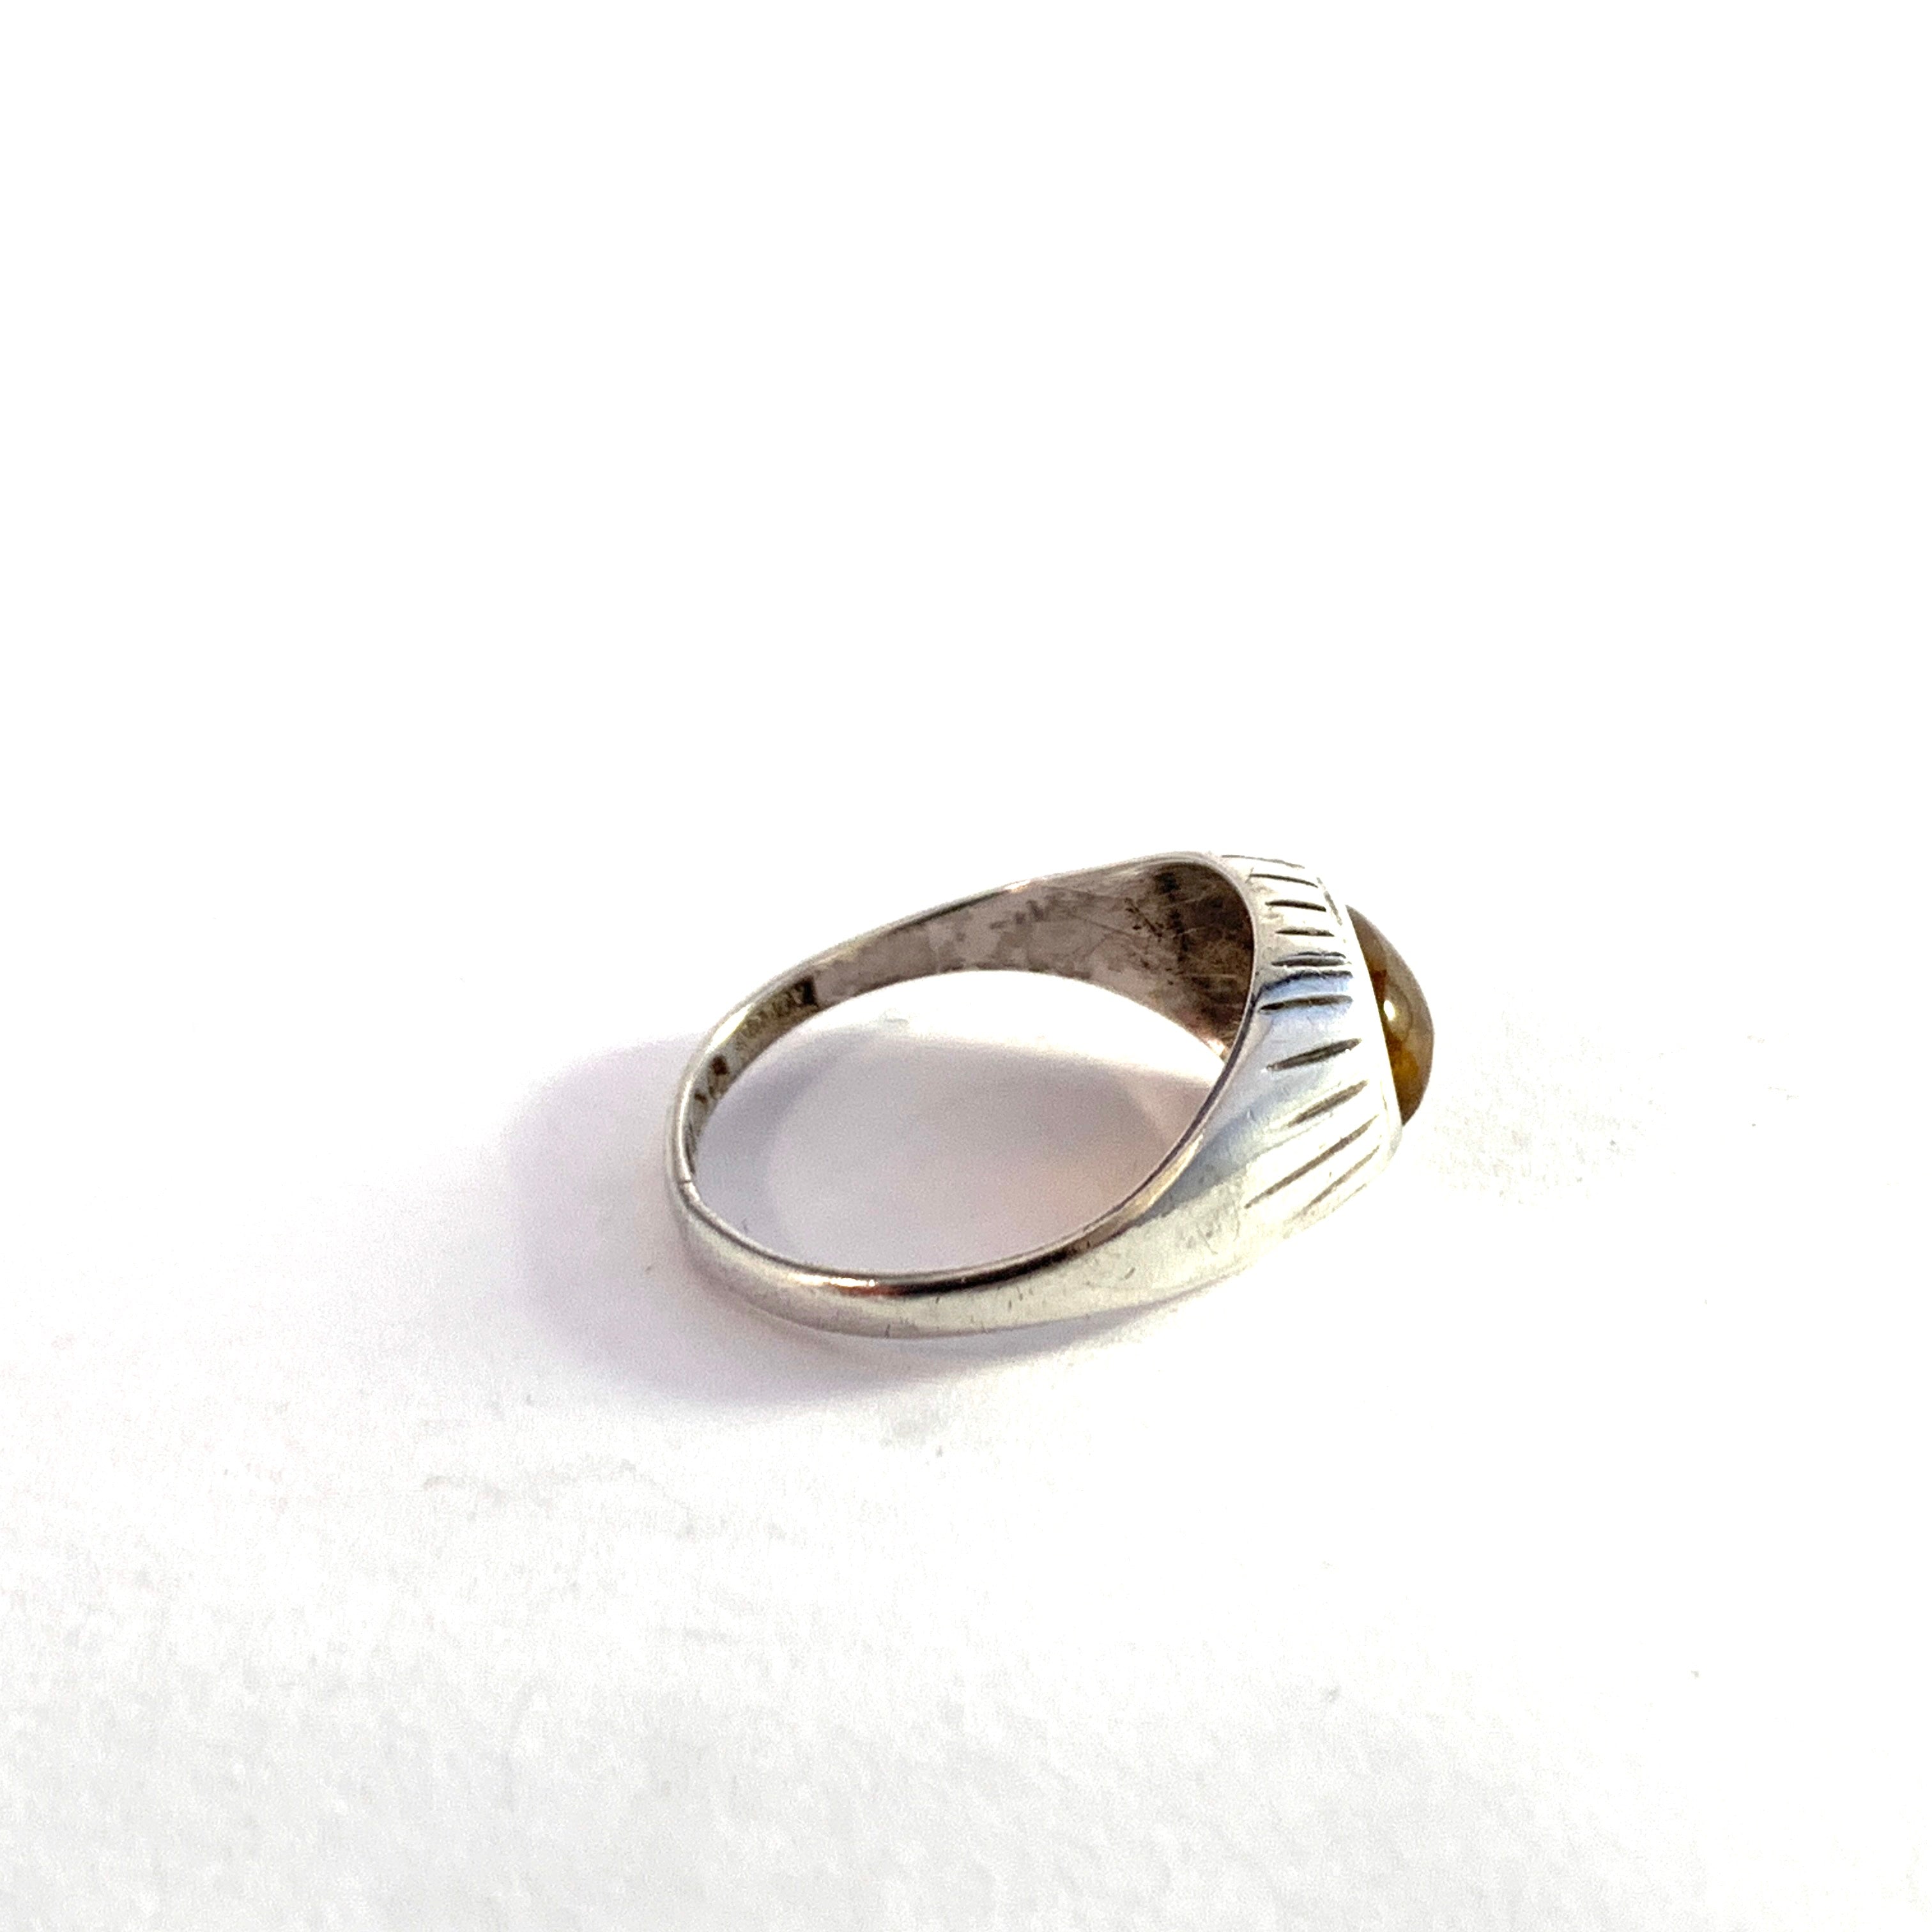 Alton, Sweden 1950s. Mid Century Modern Solid Silver Amber Ring.